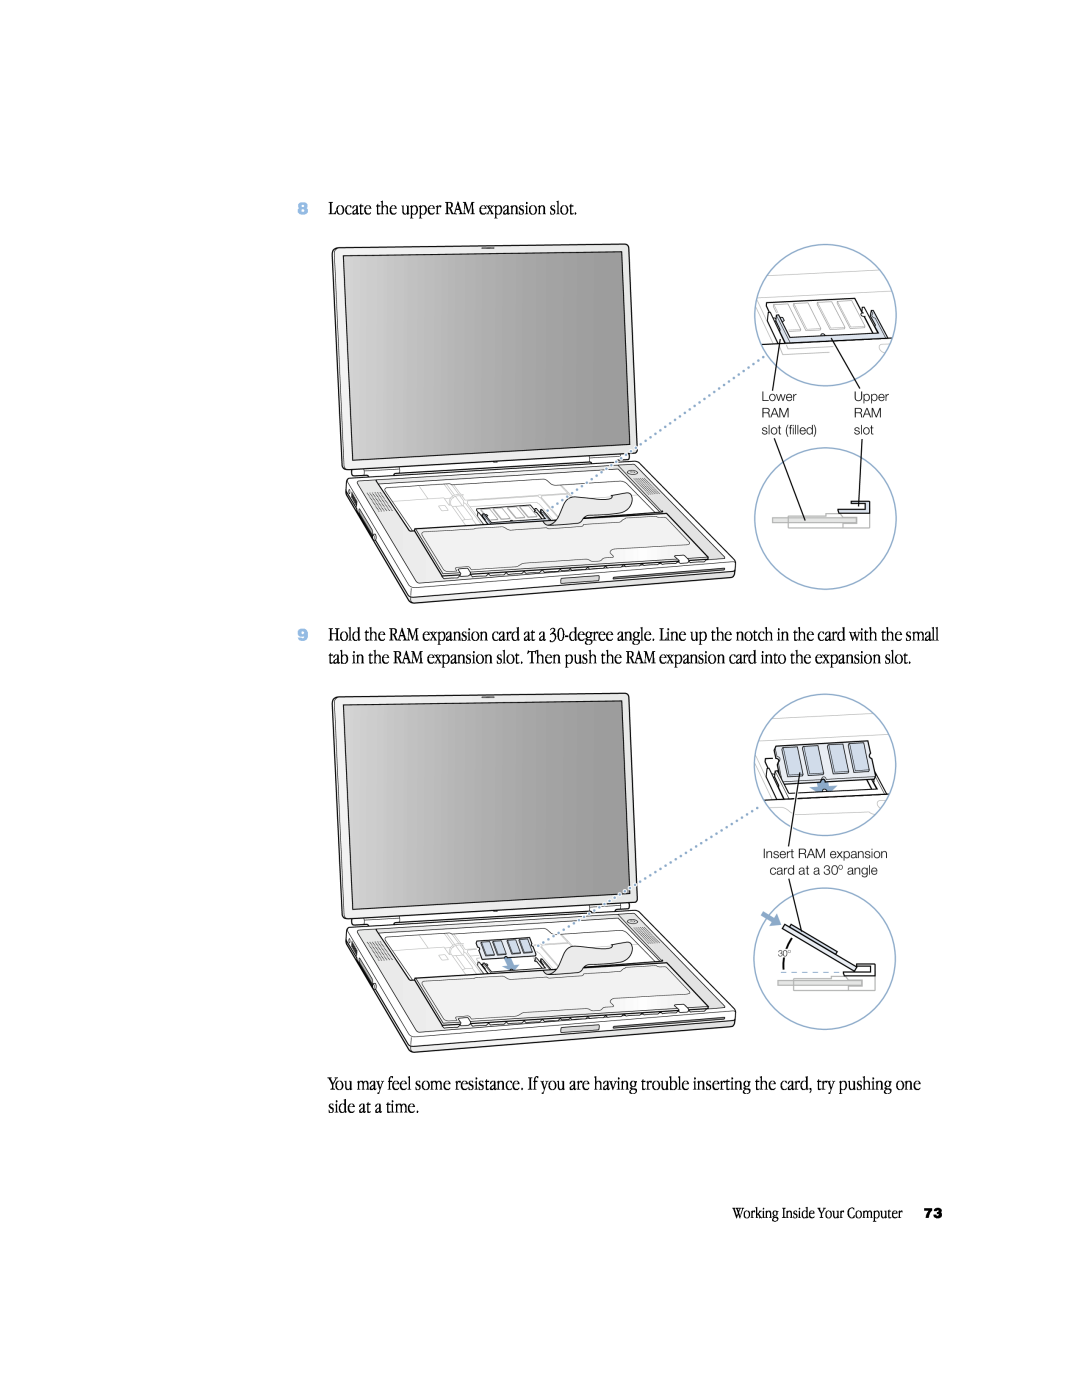 Apple powerbook g4 manual Locate the upper RAM expansion slot 